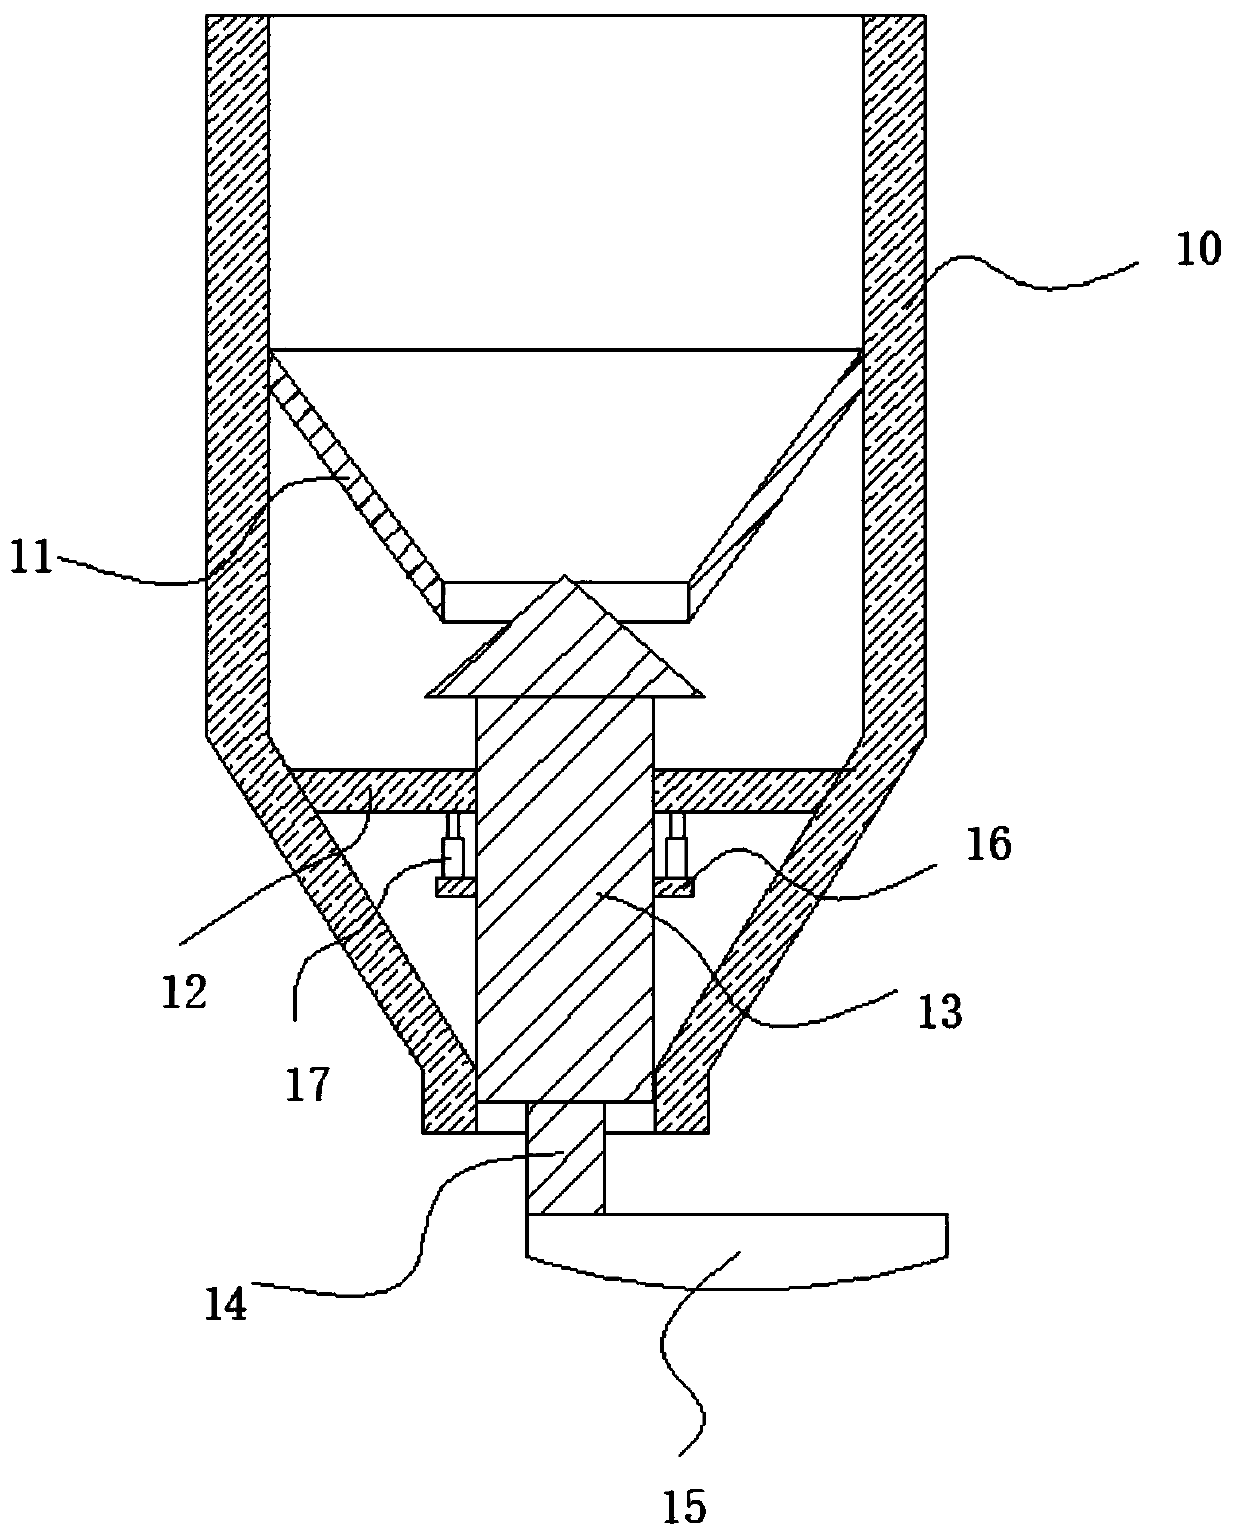 Continuous quantitative feeding and synchronous conveying device for coating production